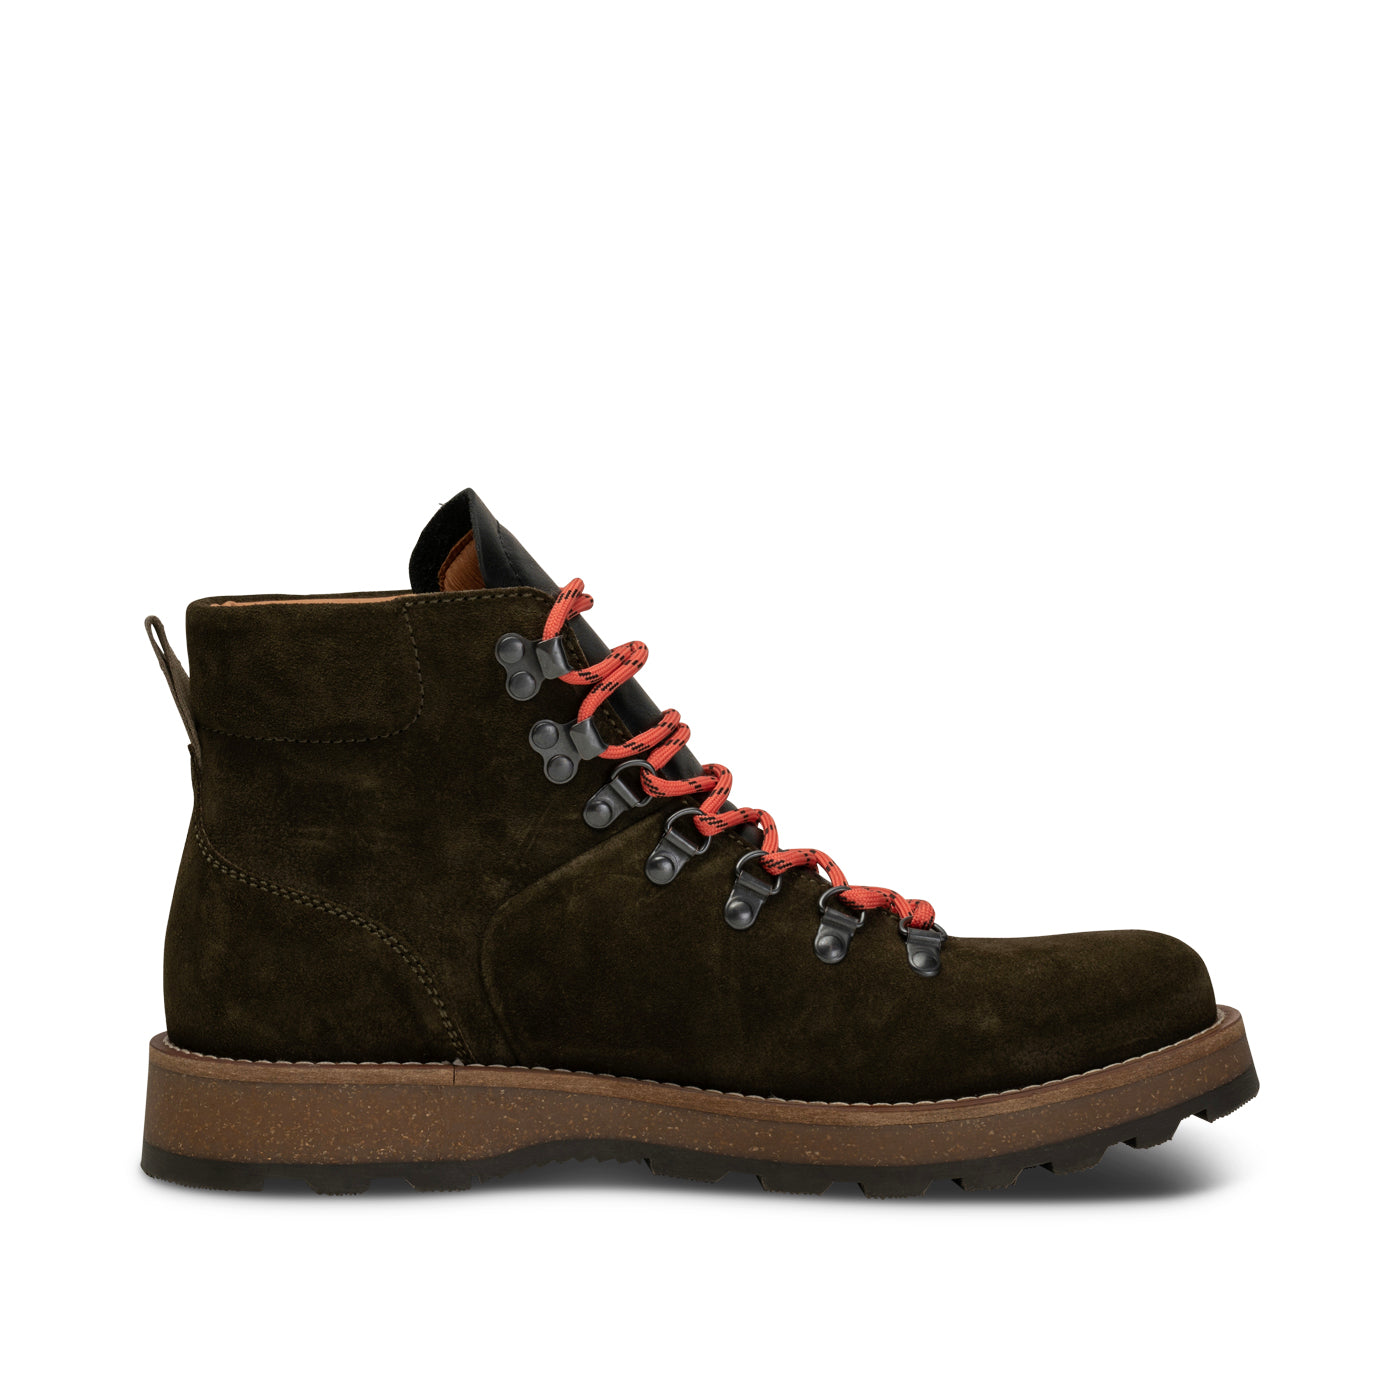 SHOE THE BEAR MENS Rosco Boot Water Repellent Suede Boots 151 KHAKI